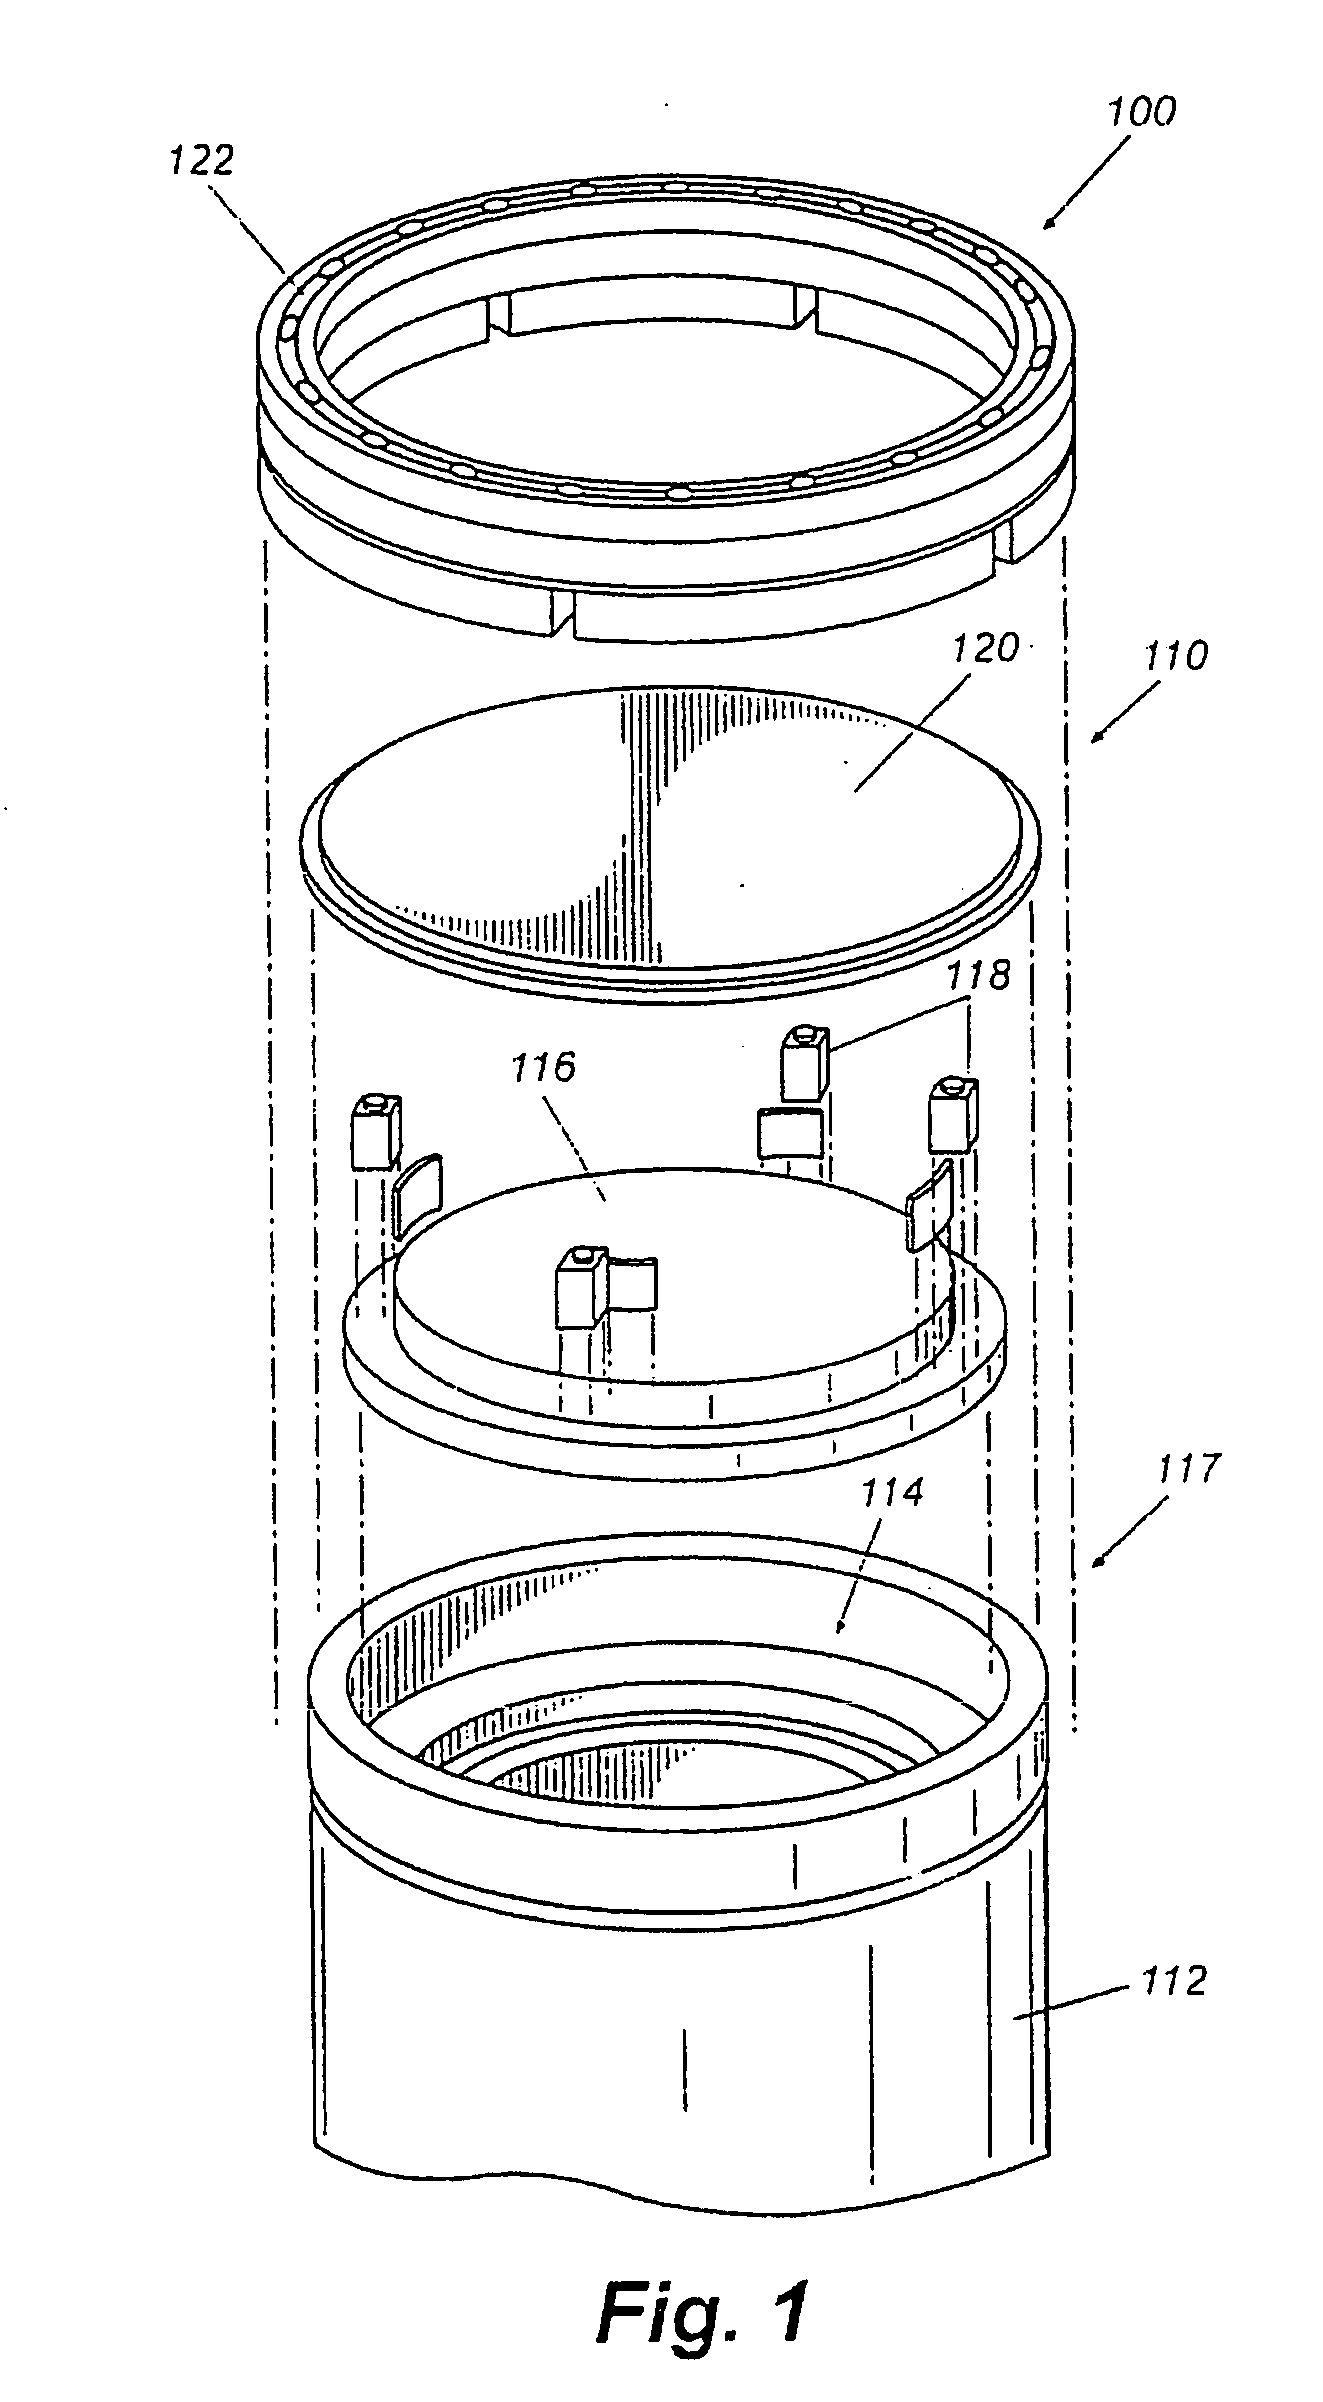 Methods for transporting and canistering nuclear spent fuel